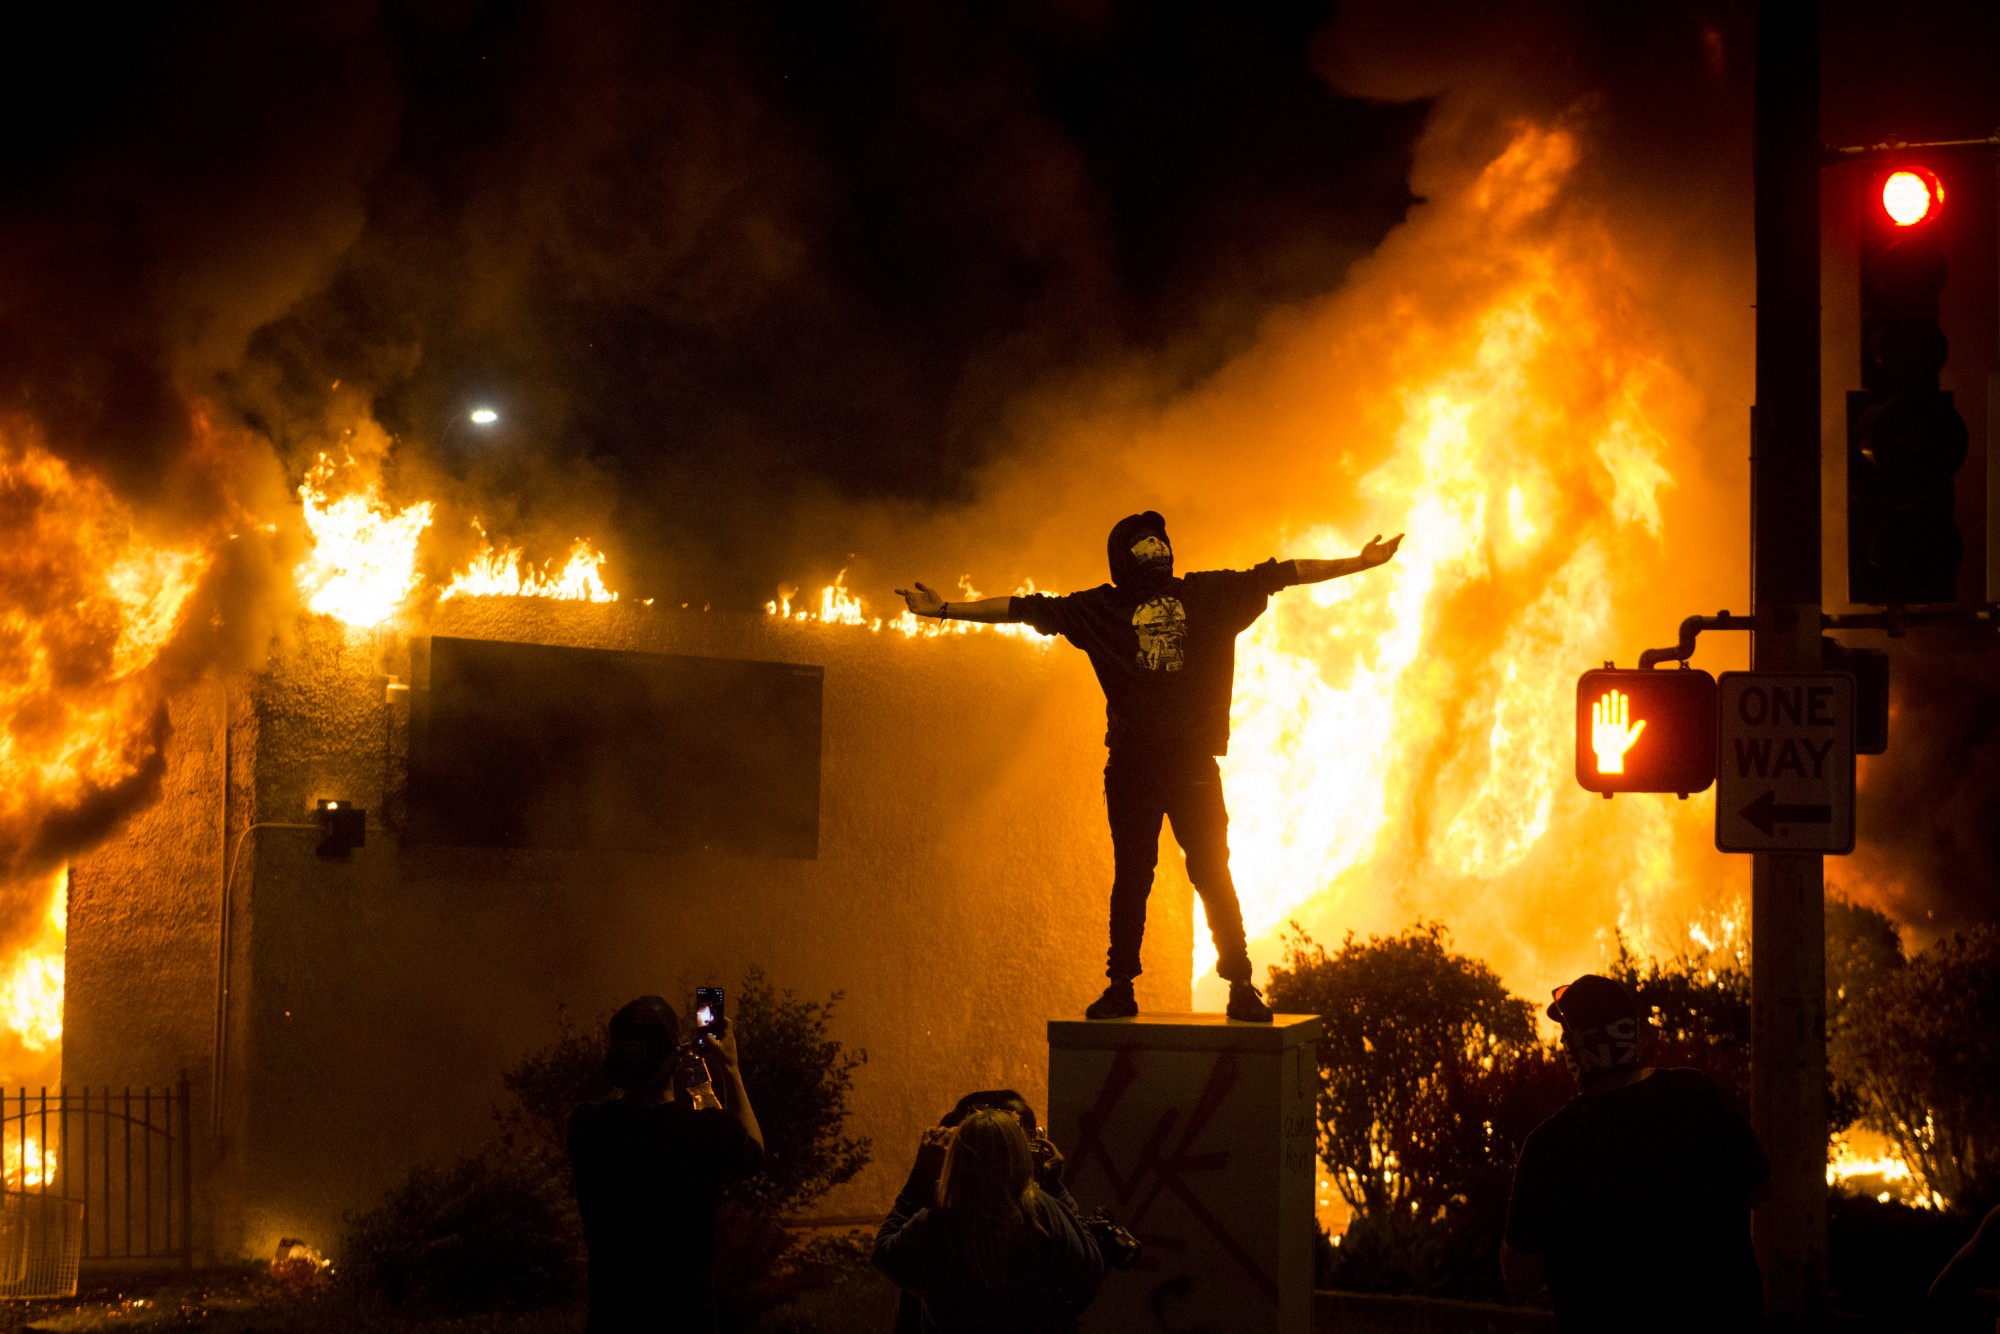 A person poses for photos in front of a burning building as part of riots near the Minneapolis 5th Police Precinct on Friday, May 29. 